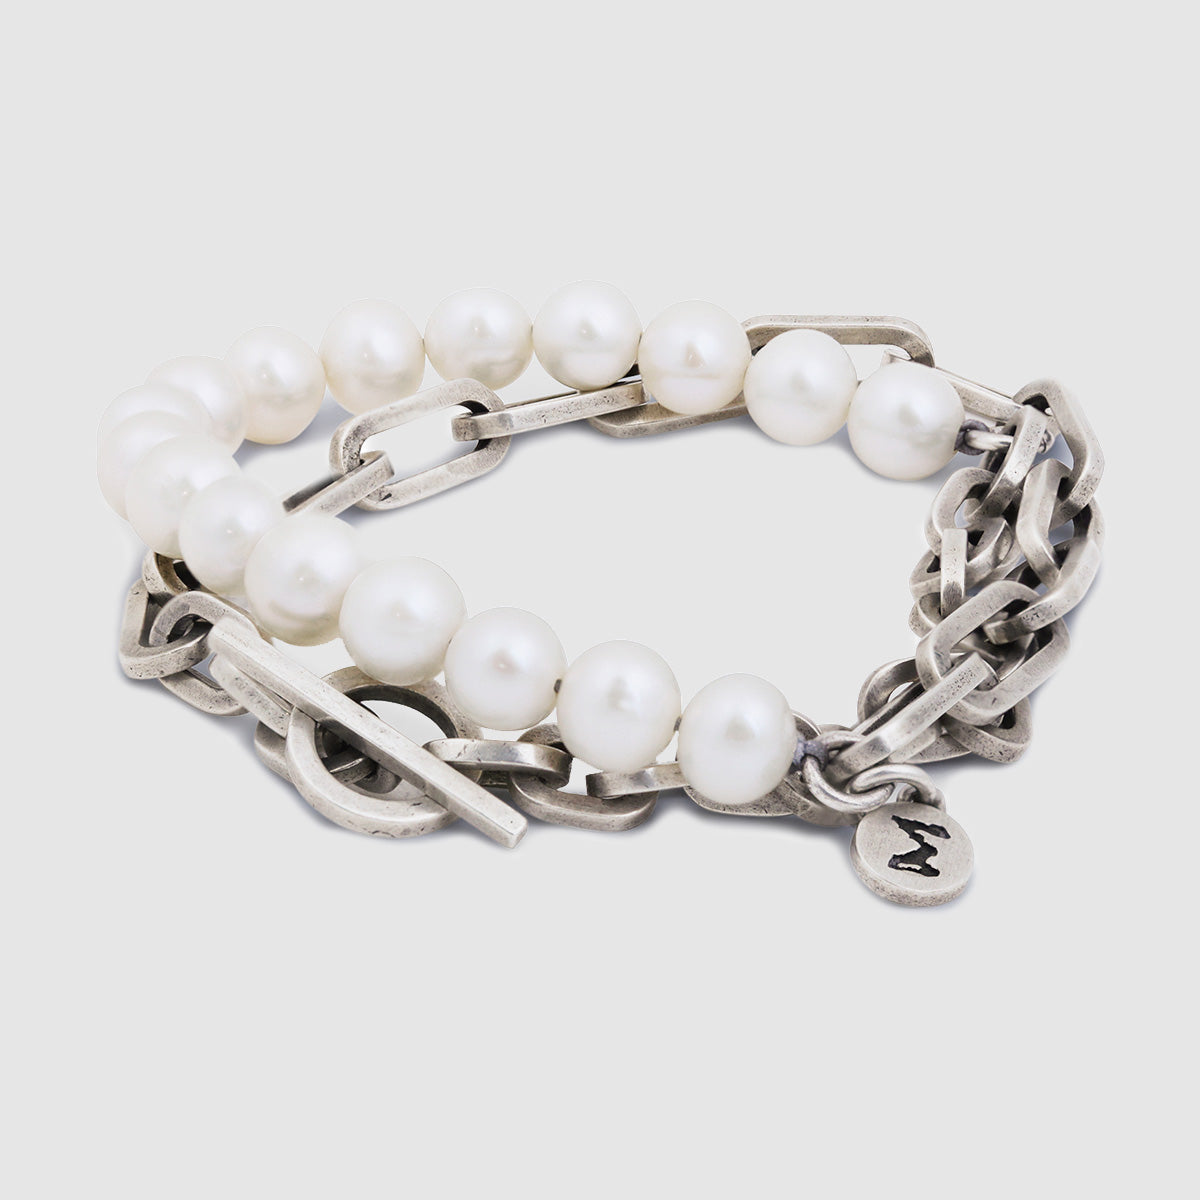 Trio Elm Bracelet/Necklace in Silver with White Pearls